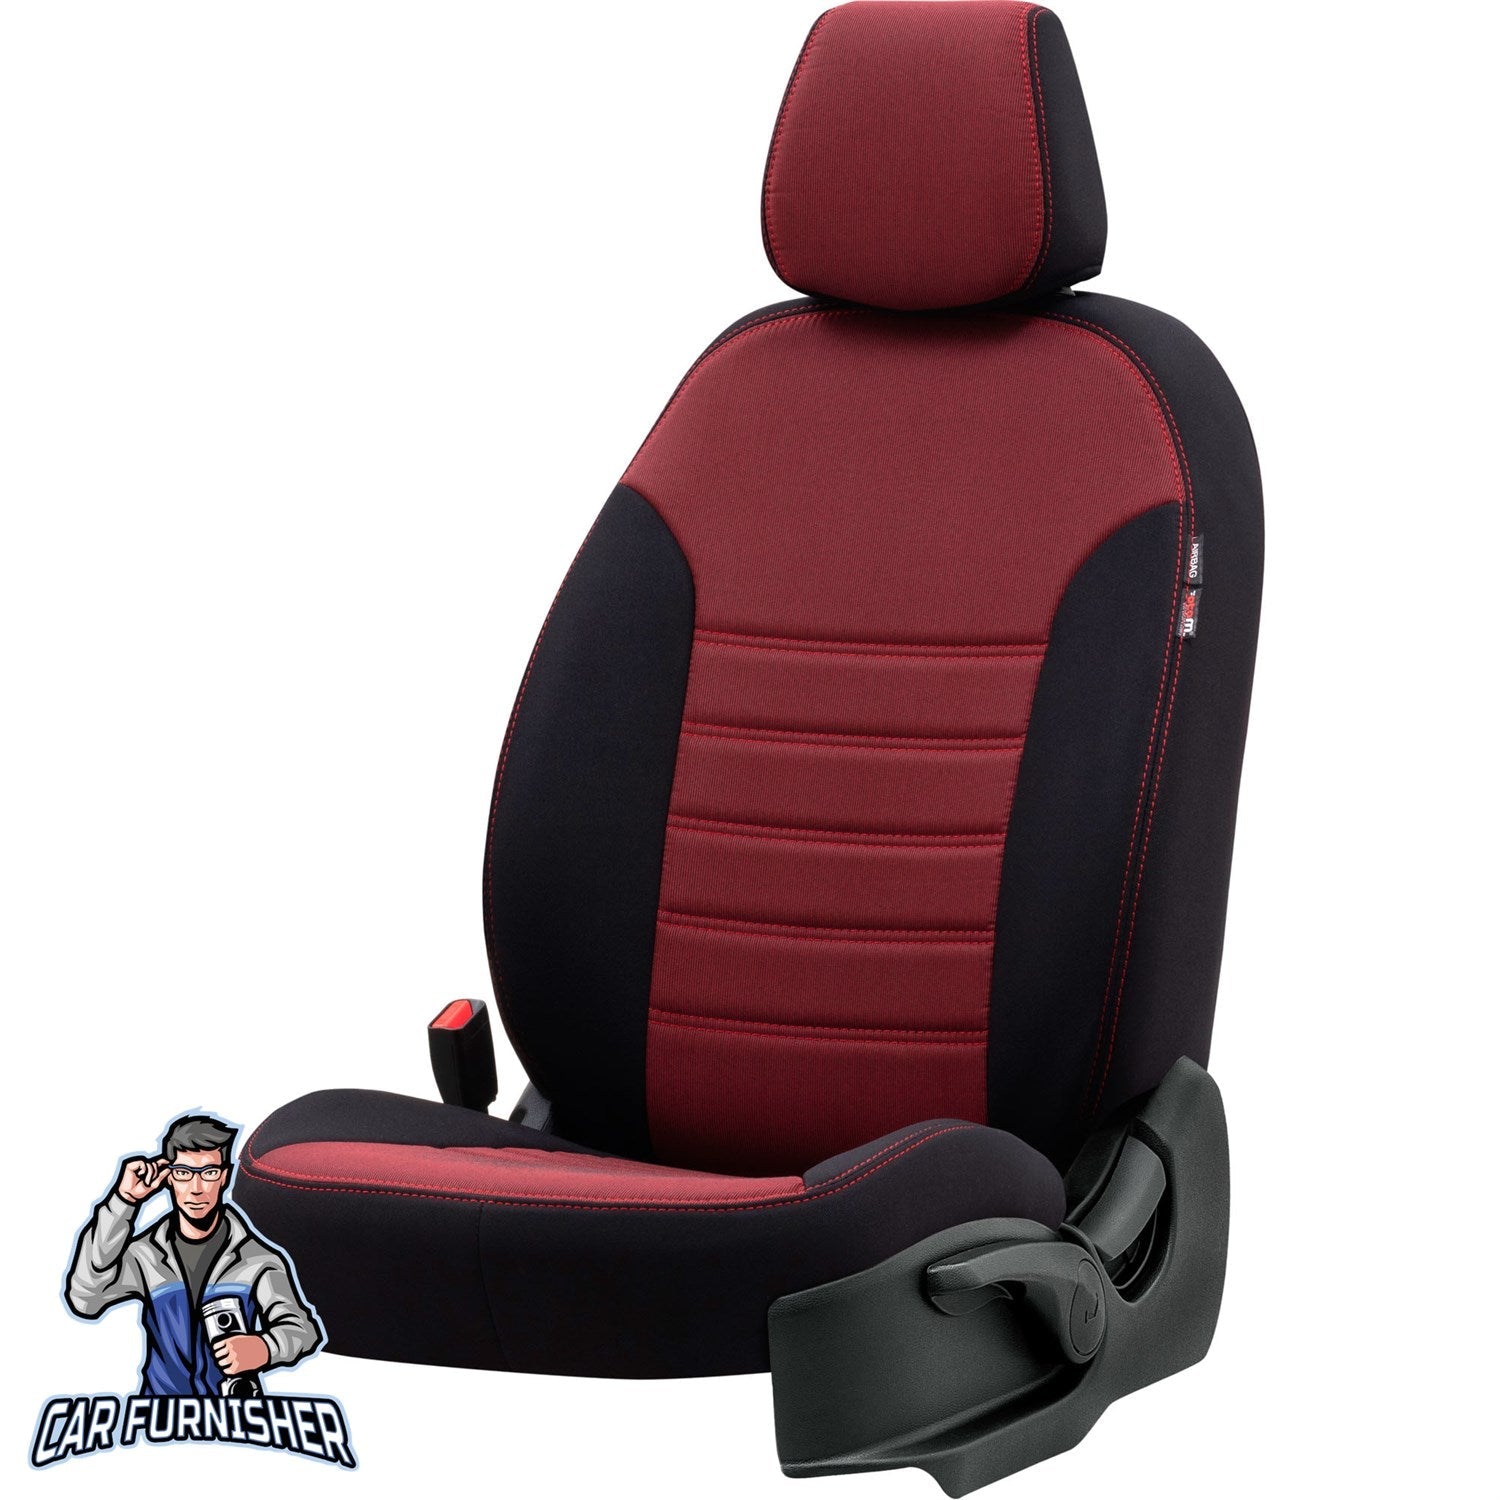 Volkswagen Crafter Seat Cover Original Jacquard Design Red Jacquard Fabric